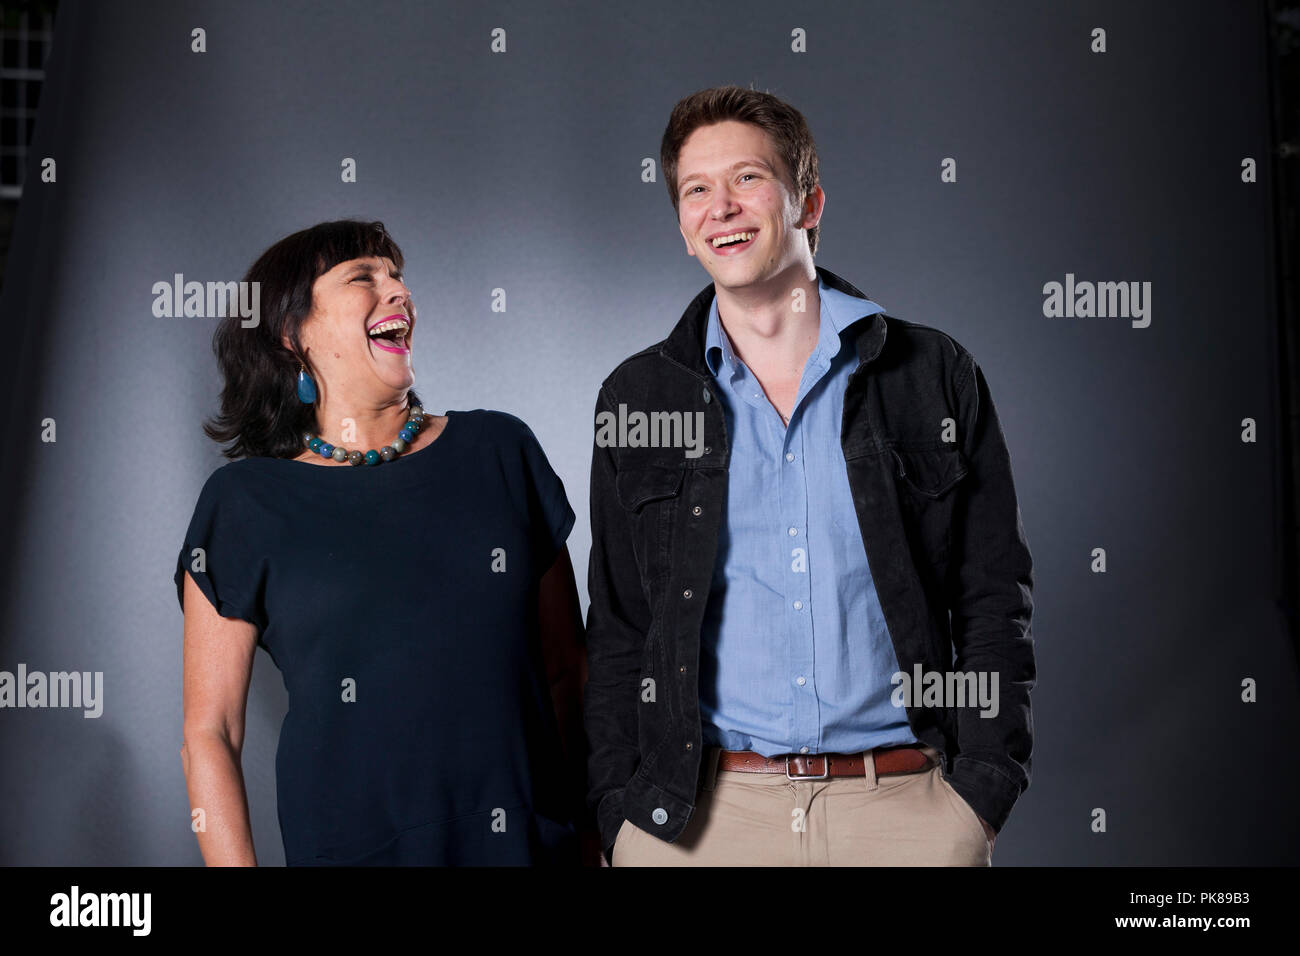 Professor Patricia Waugh (left), Professor of English Literature and John Foxwell, PhD student from the Department of English and Hearing the Voice project at Durham University. Pictured at the Edinburgh International Book Festival. Edinburgh, Scotland.  Picture by Gary Doak / Alamy Stock Photo